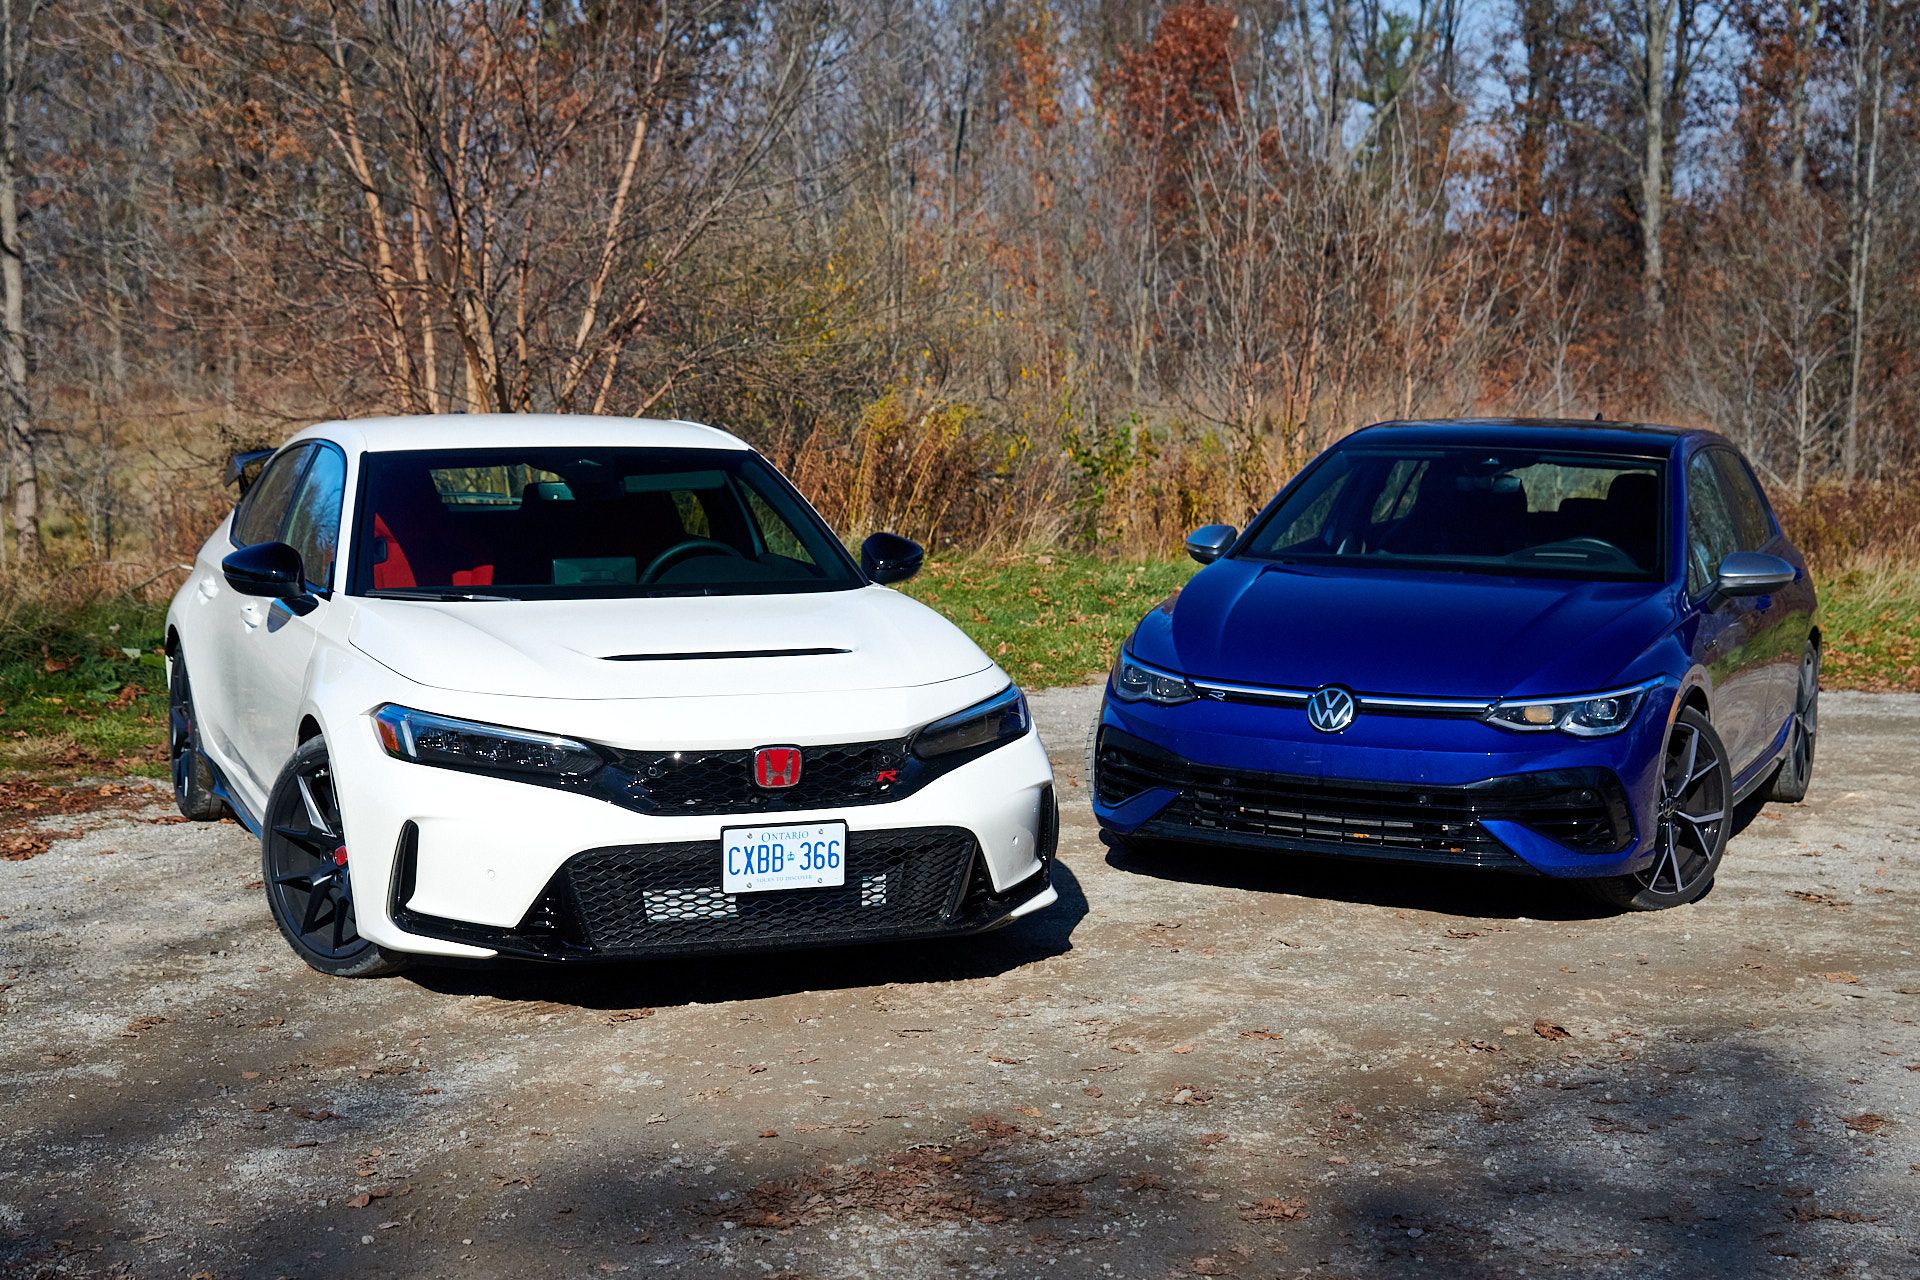 2020 Honda Civic Hatchback is a head-turner with turbo power